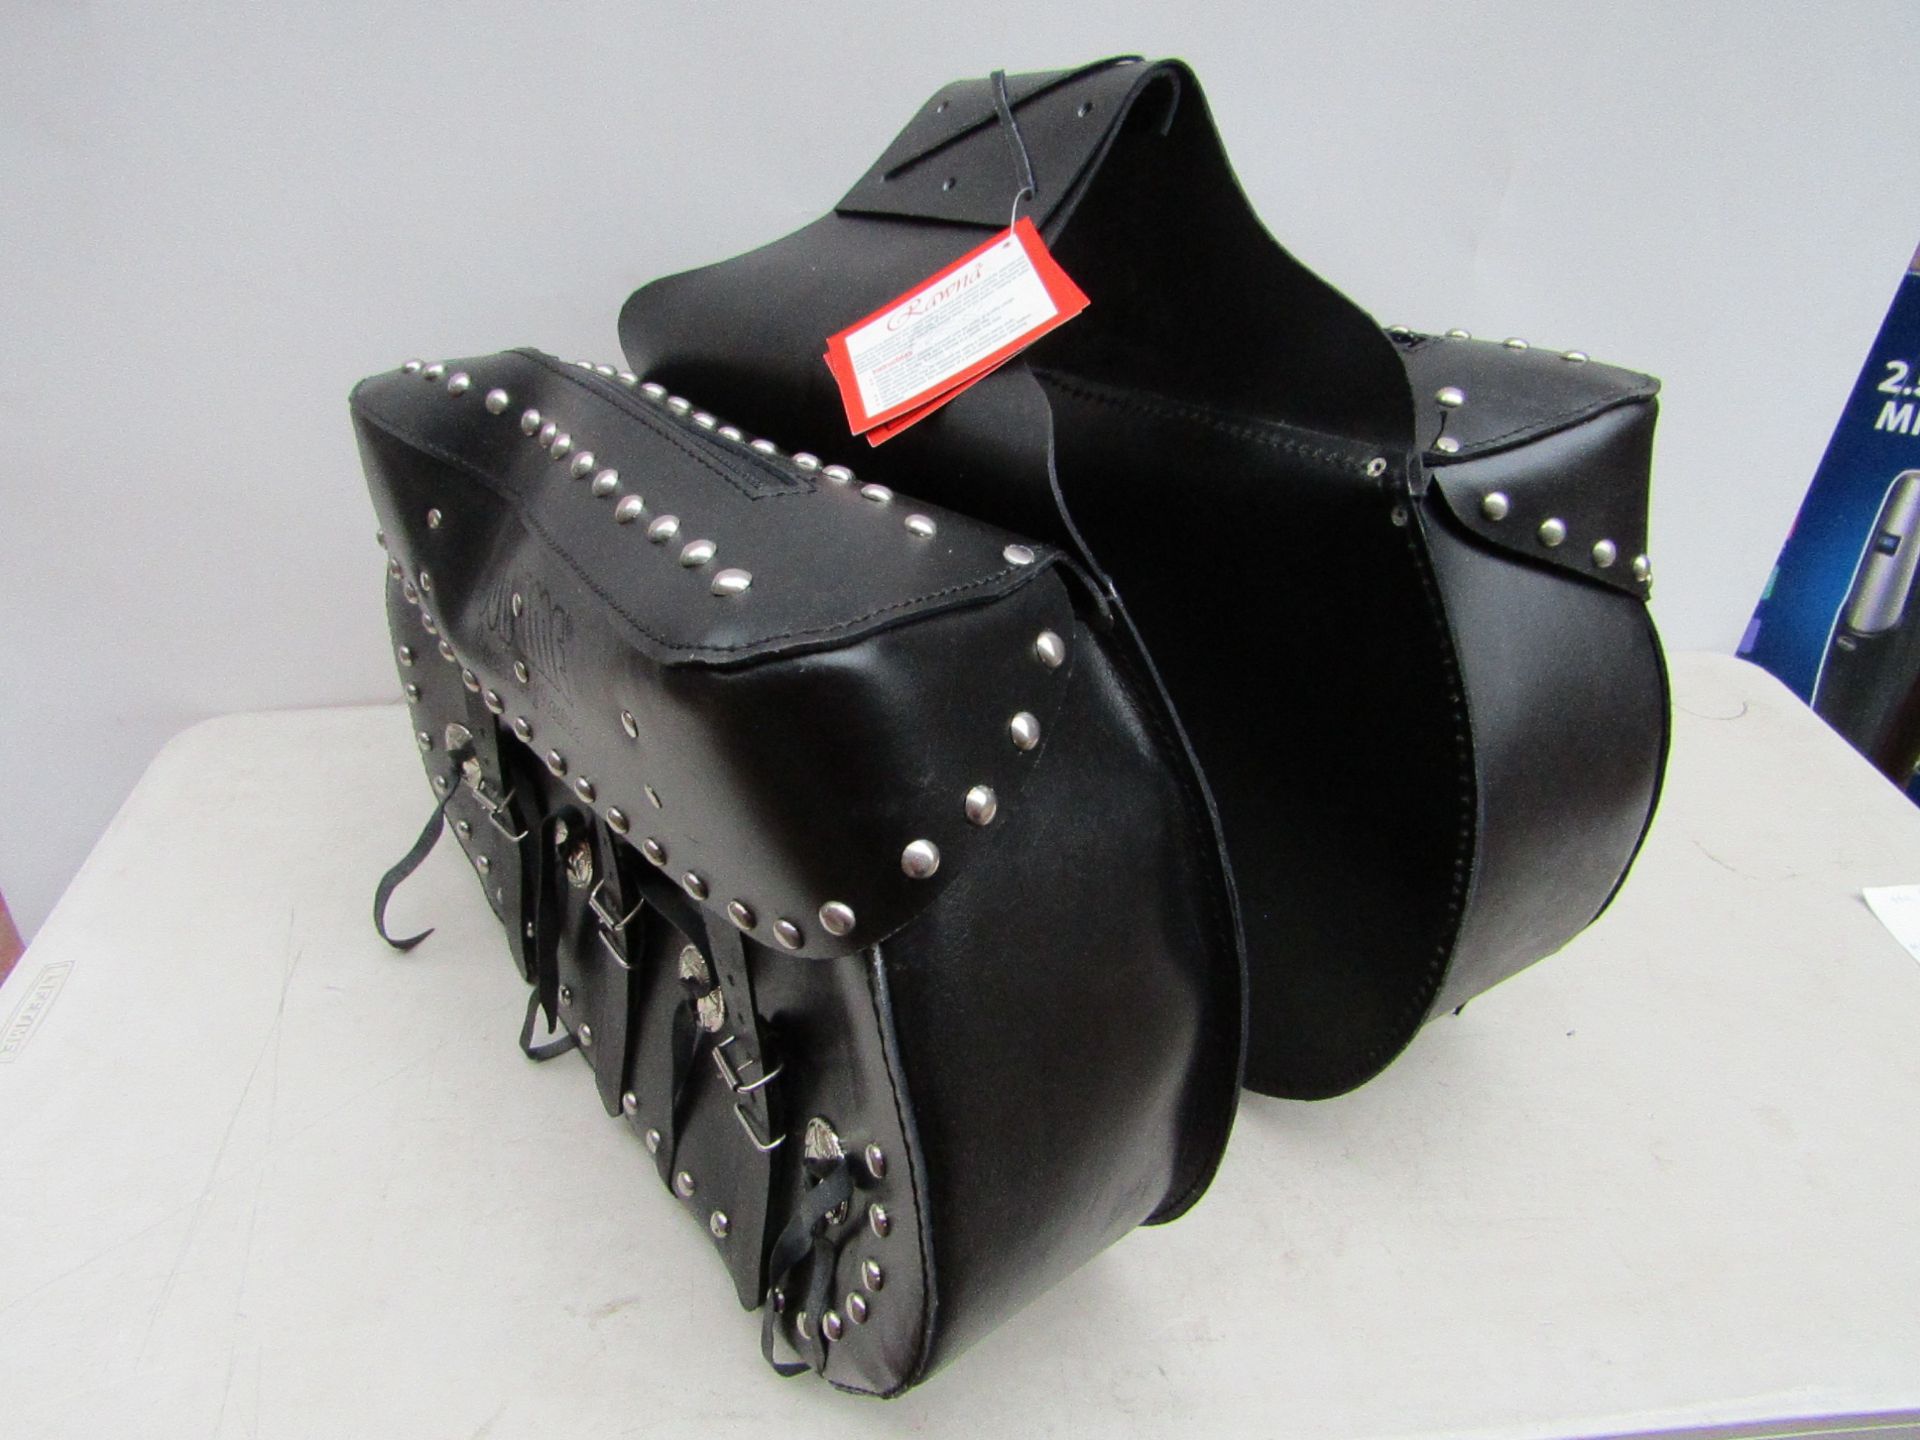 Pair (1 set) of Sublime leather motorcycle Saddle bags, These have been stored in a damp unit but